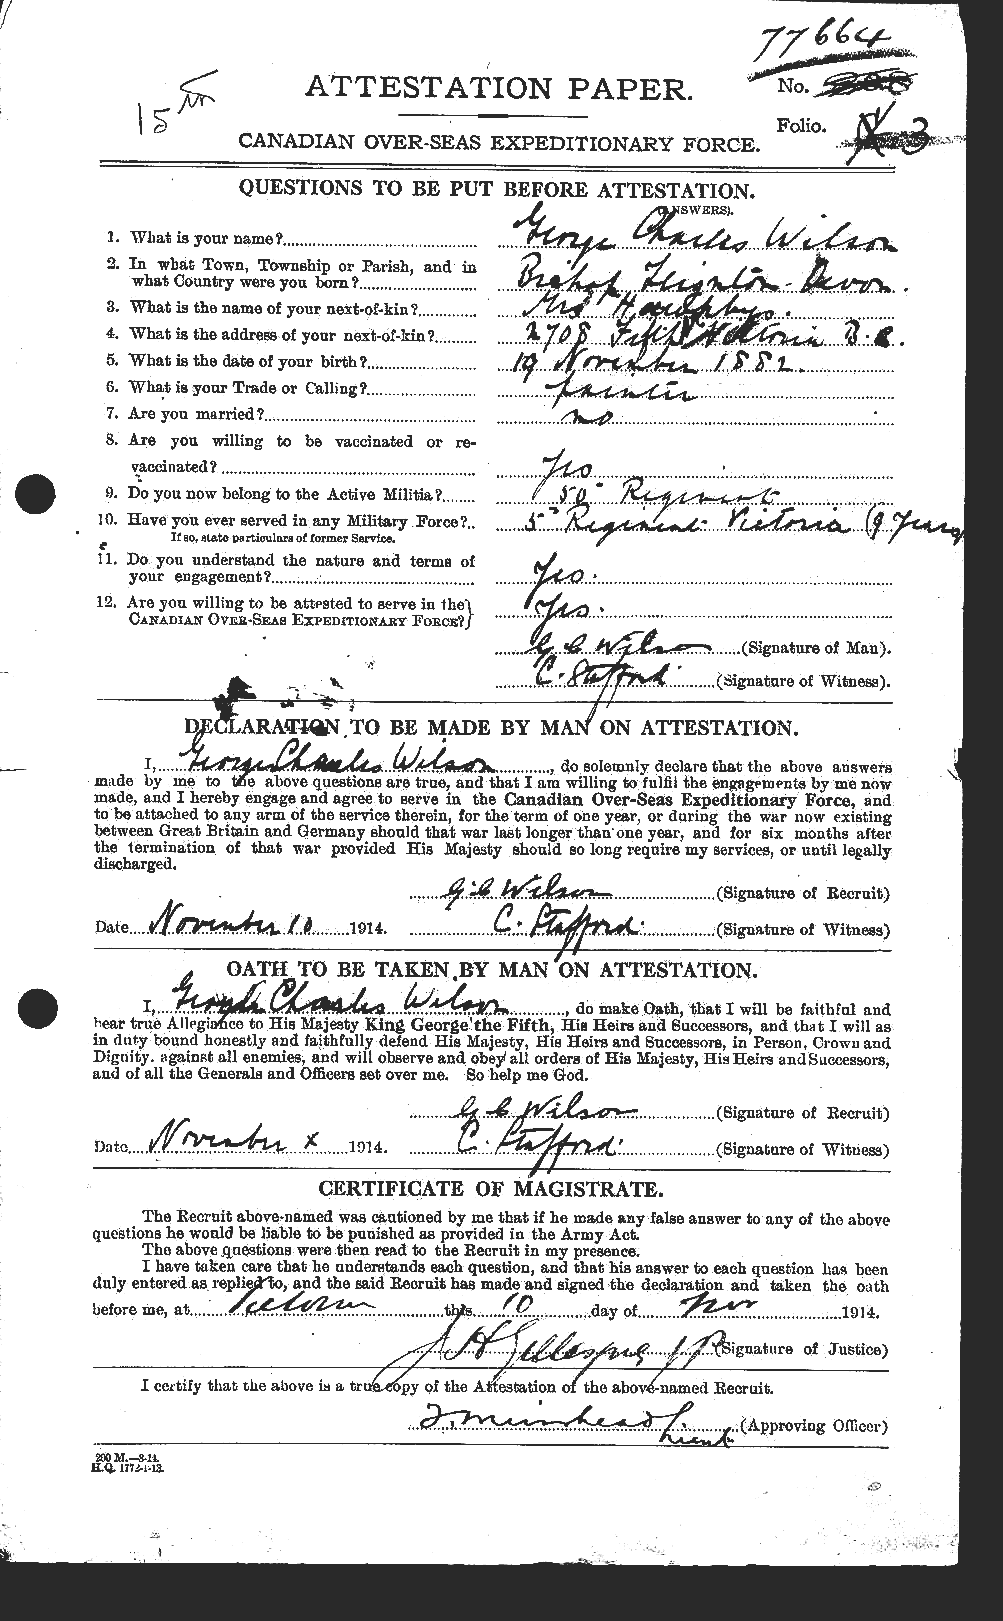 Personnel Records of the First World War - CEF 677706a